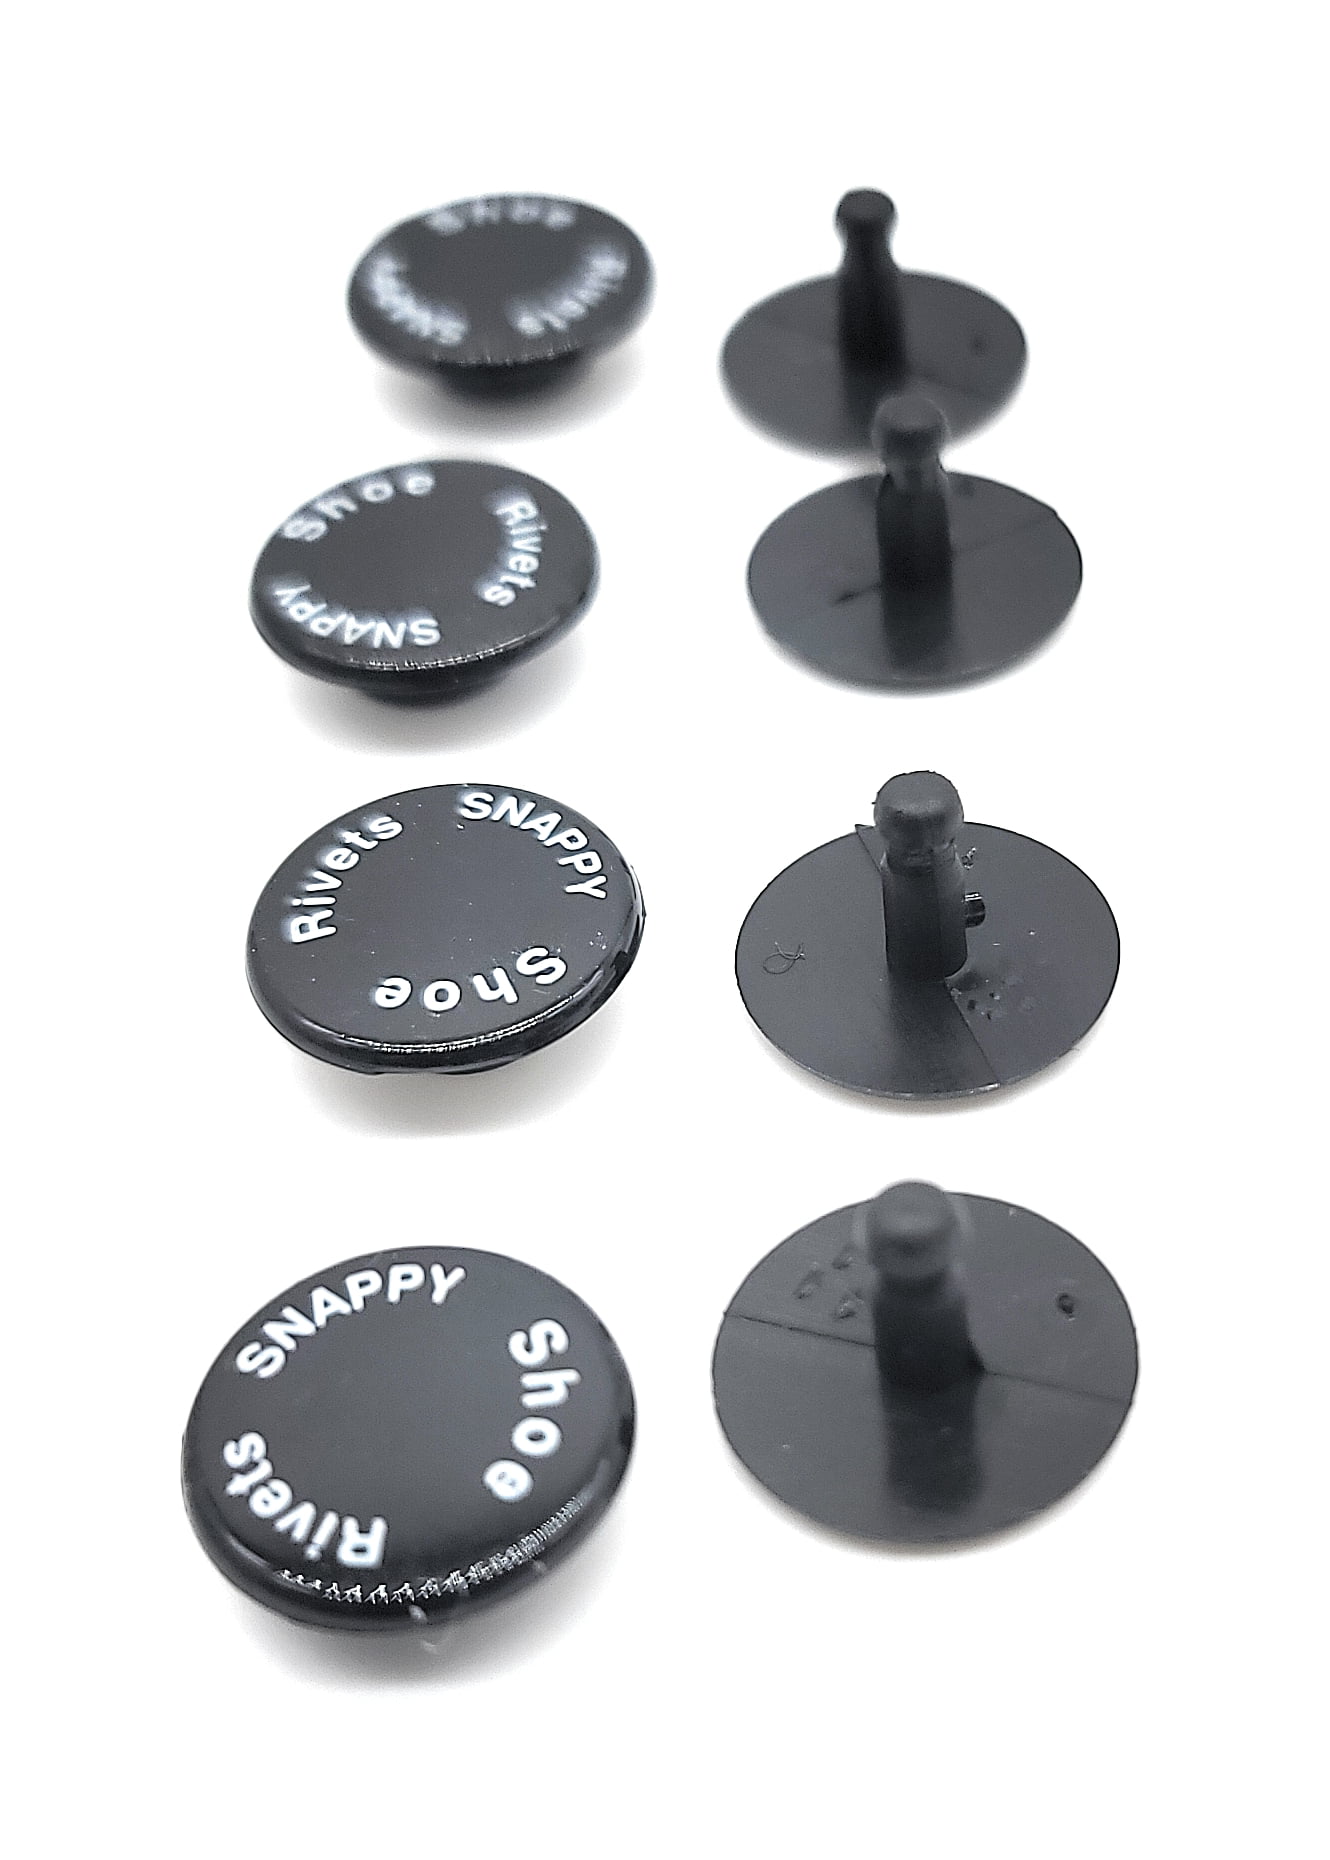 Snappy Clog Rivets Black Set of 4 Clog Replacement 